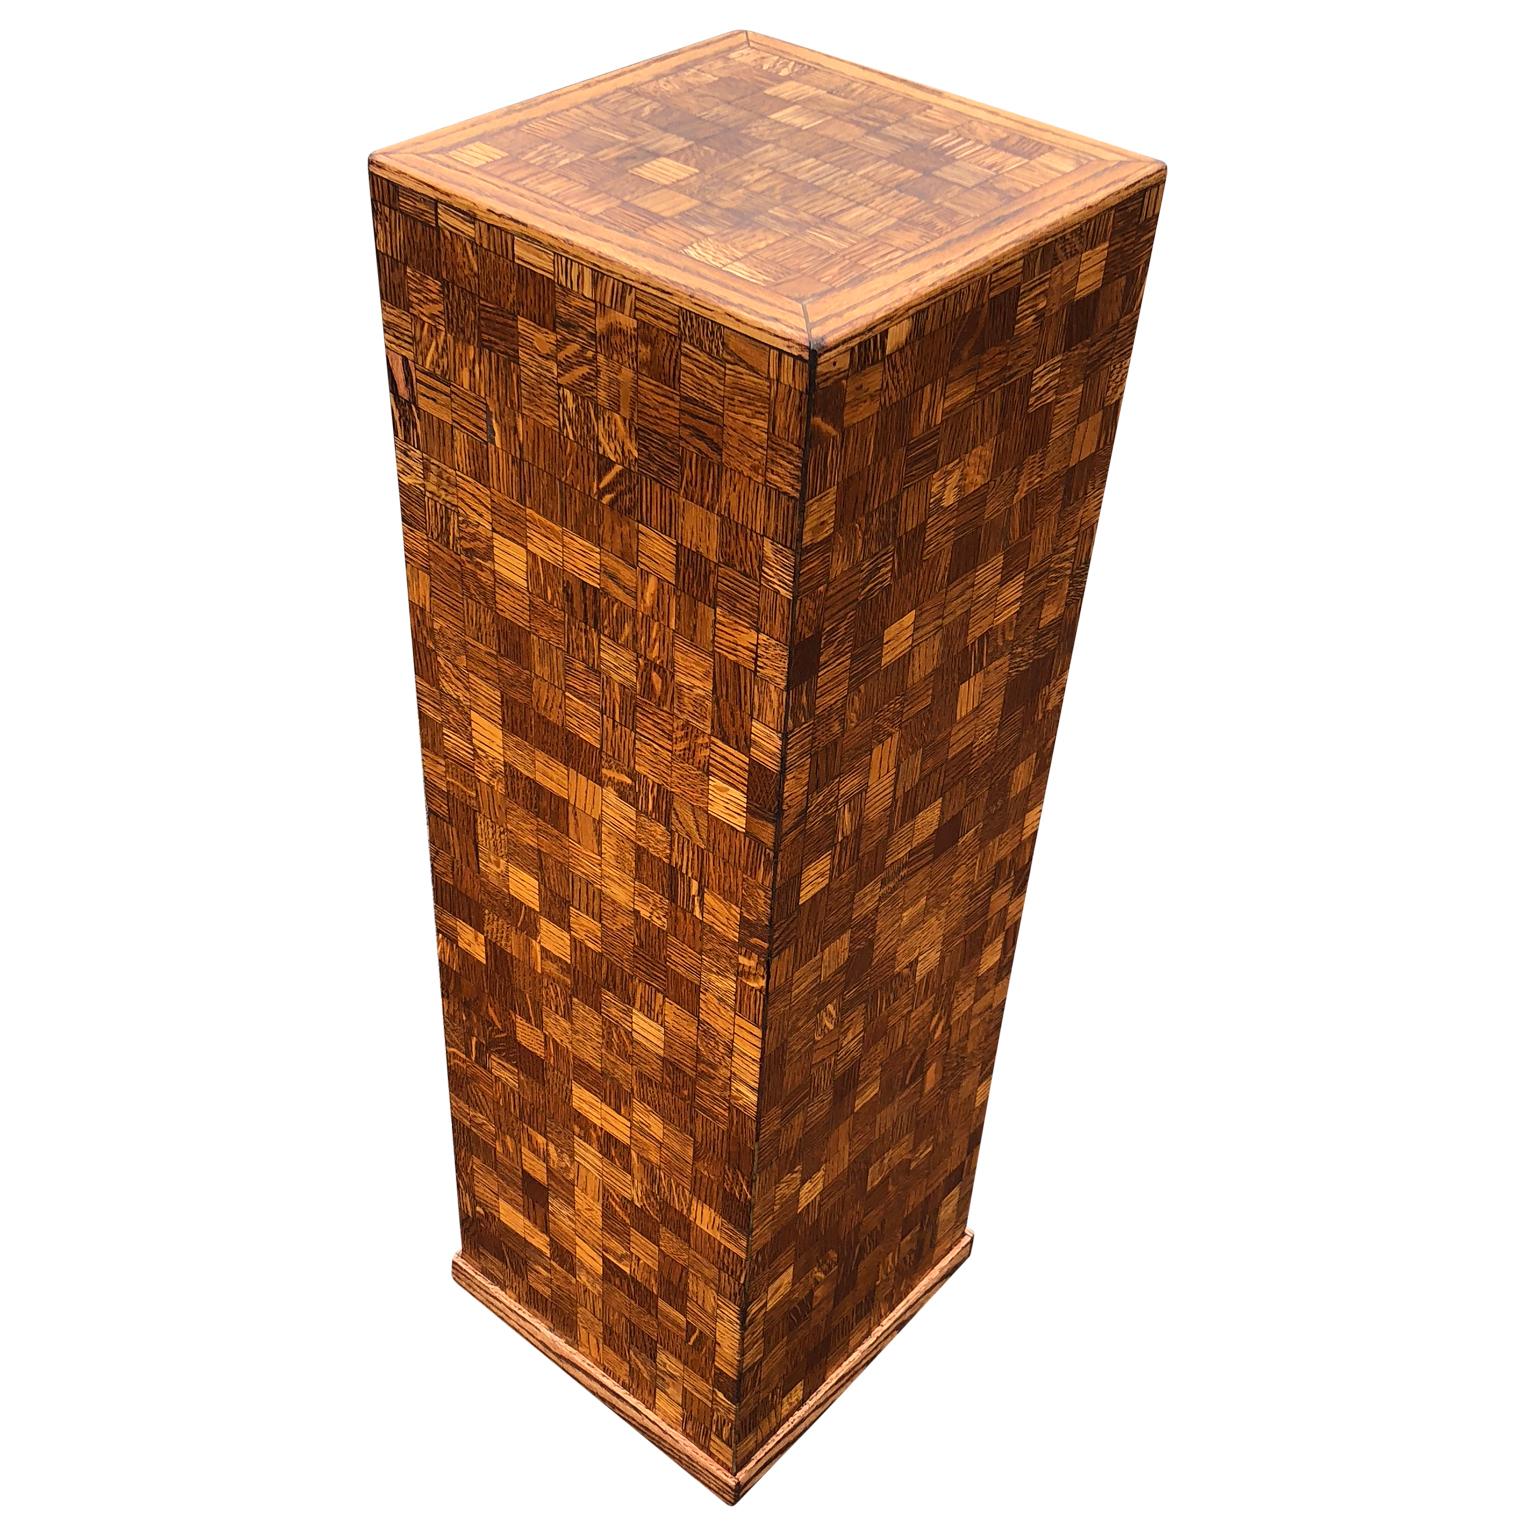 Hand-Crafted Square Mid-Century Modern Wooden Pedestal with Mosaic Wooden Tile Design